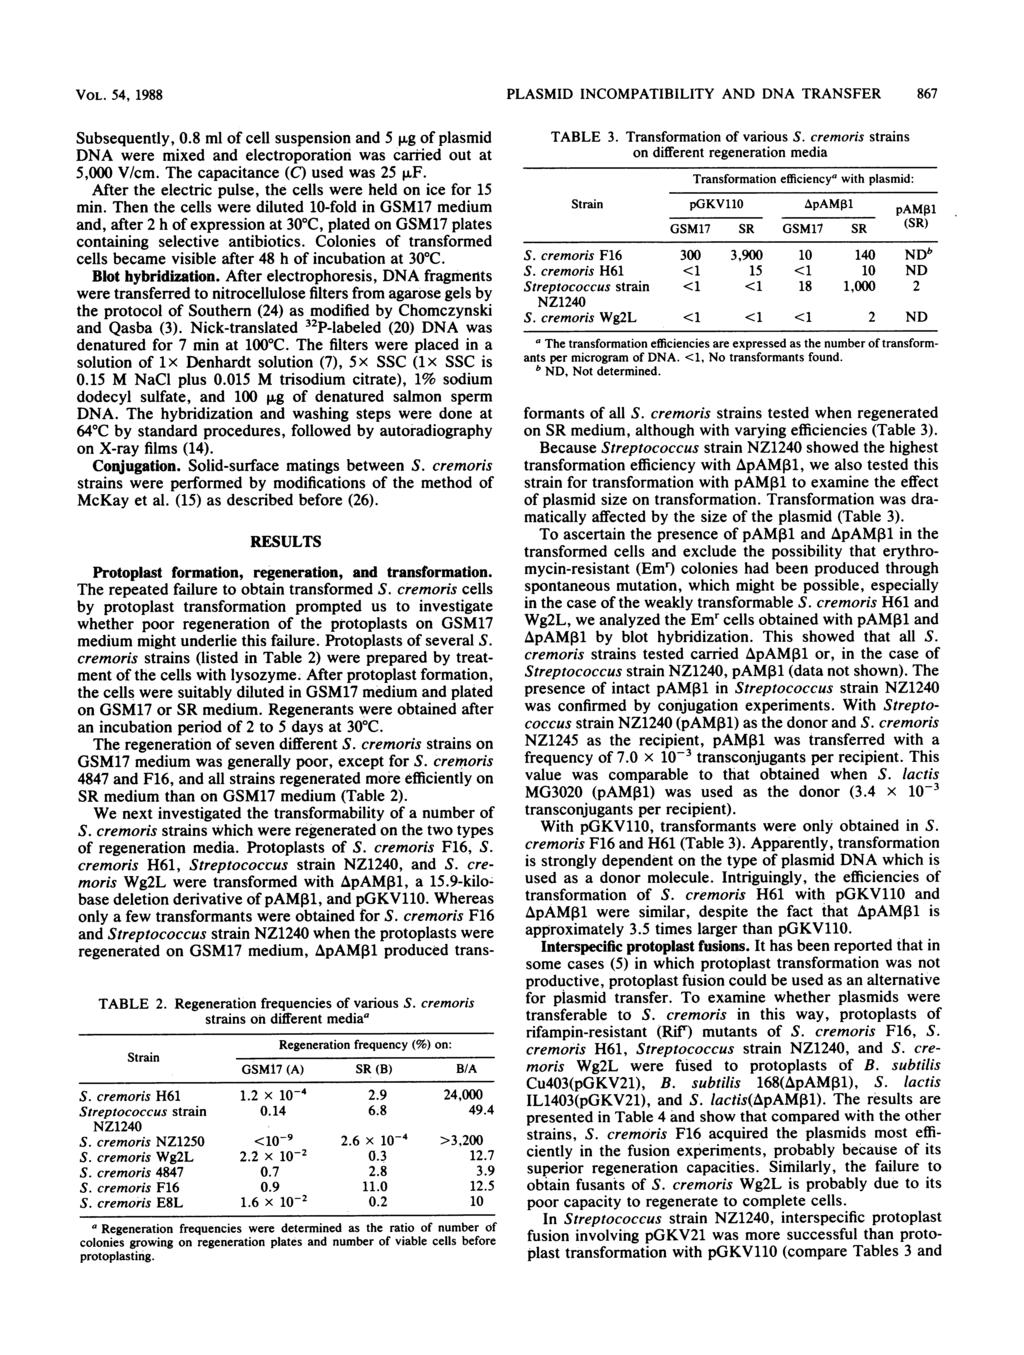 VOL. 54, 1988 Subsequently, 0.8 ml of cell suspension and 5,ug of plasmid DNA were mixed and electroporation was carried out at 5,000 V/cm. The capacitance (C) used was 25,F.